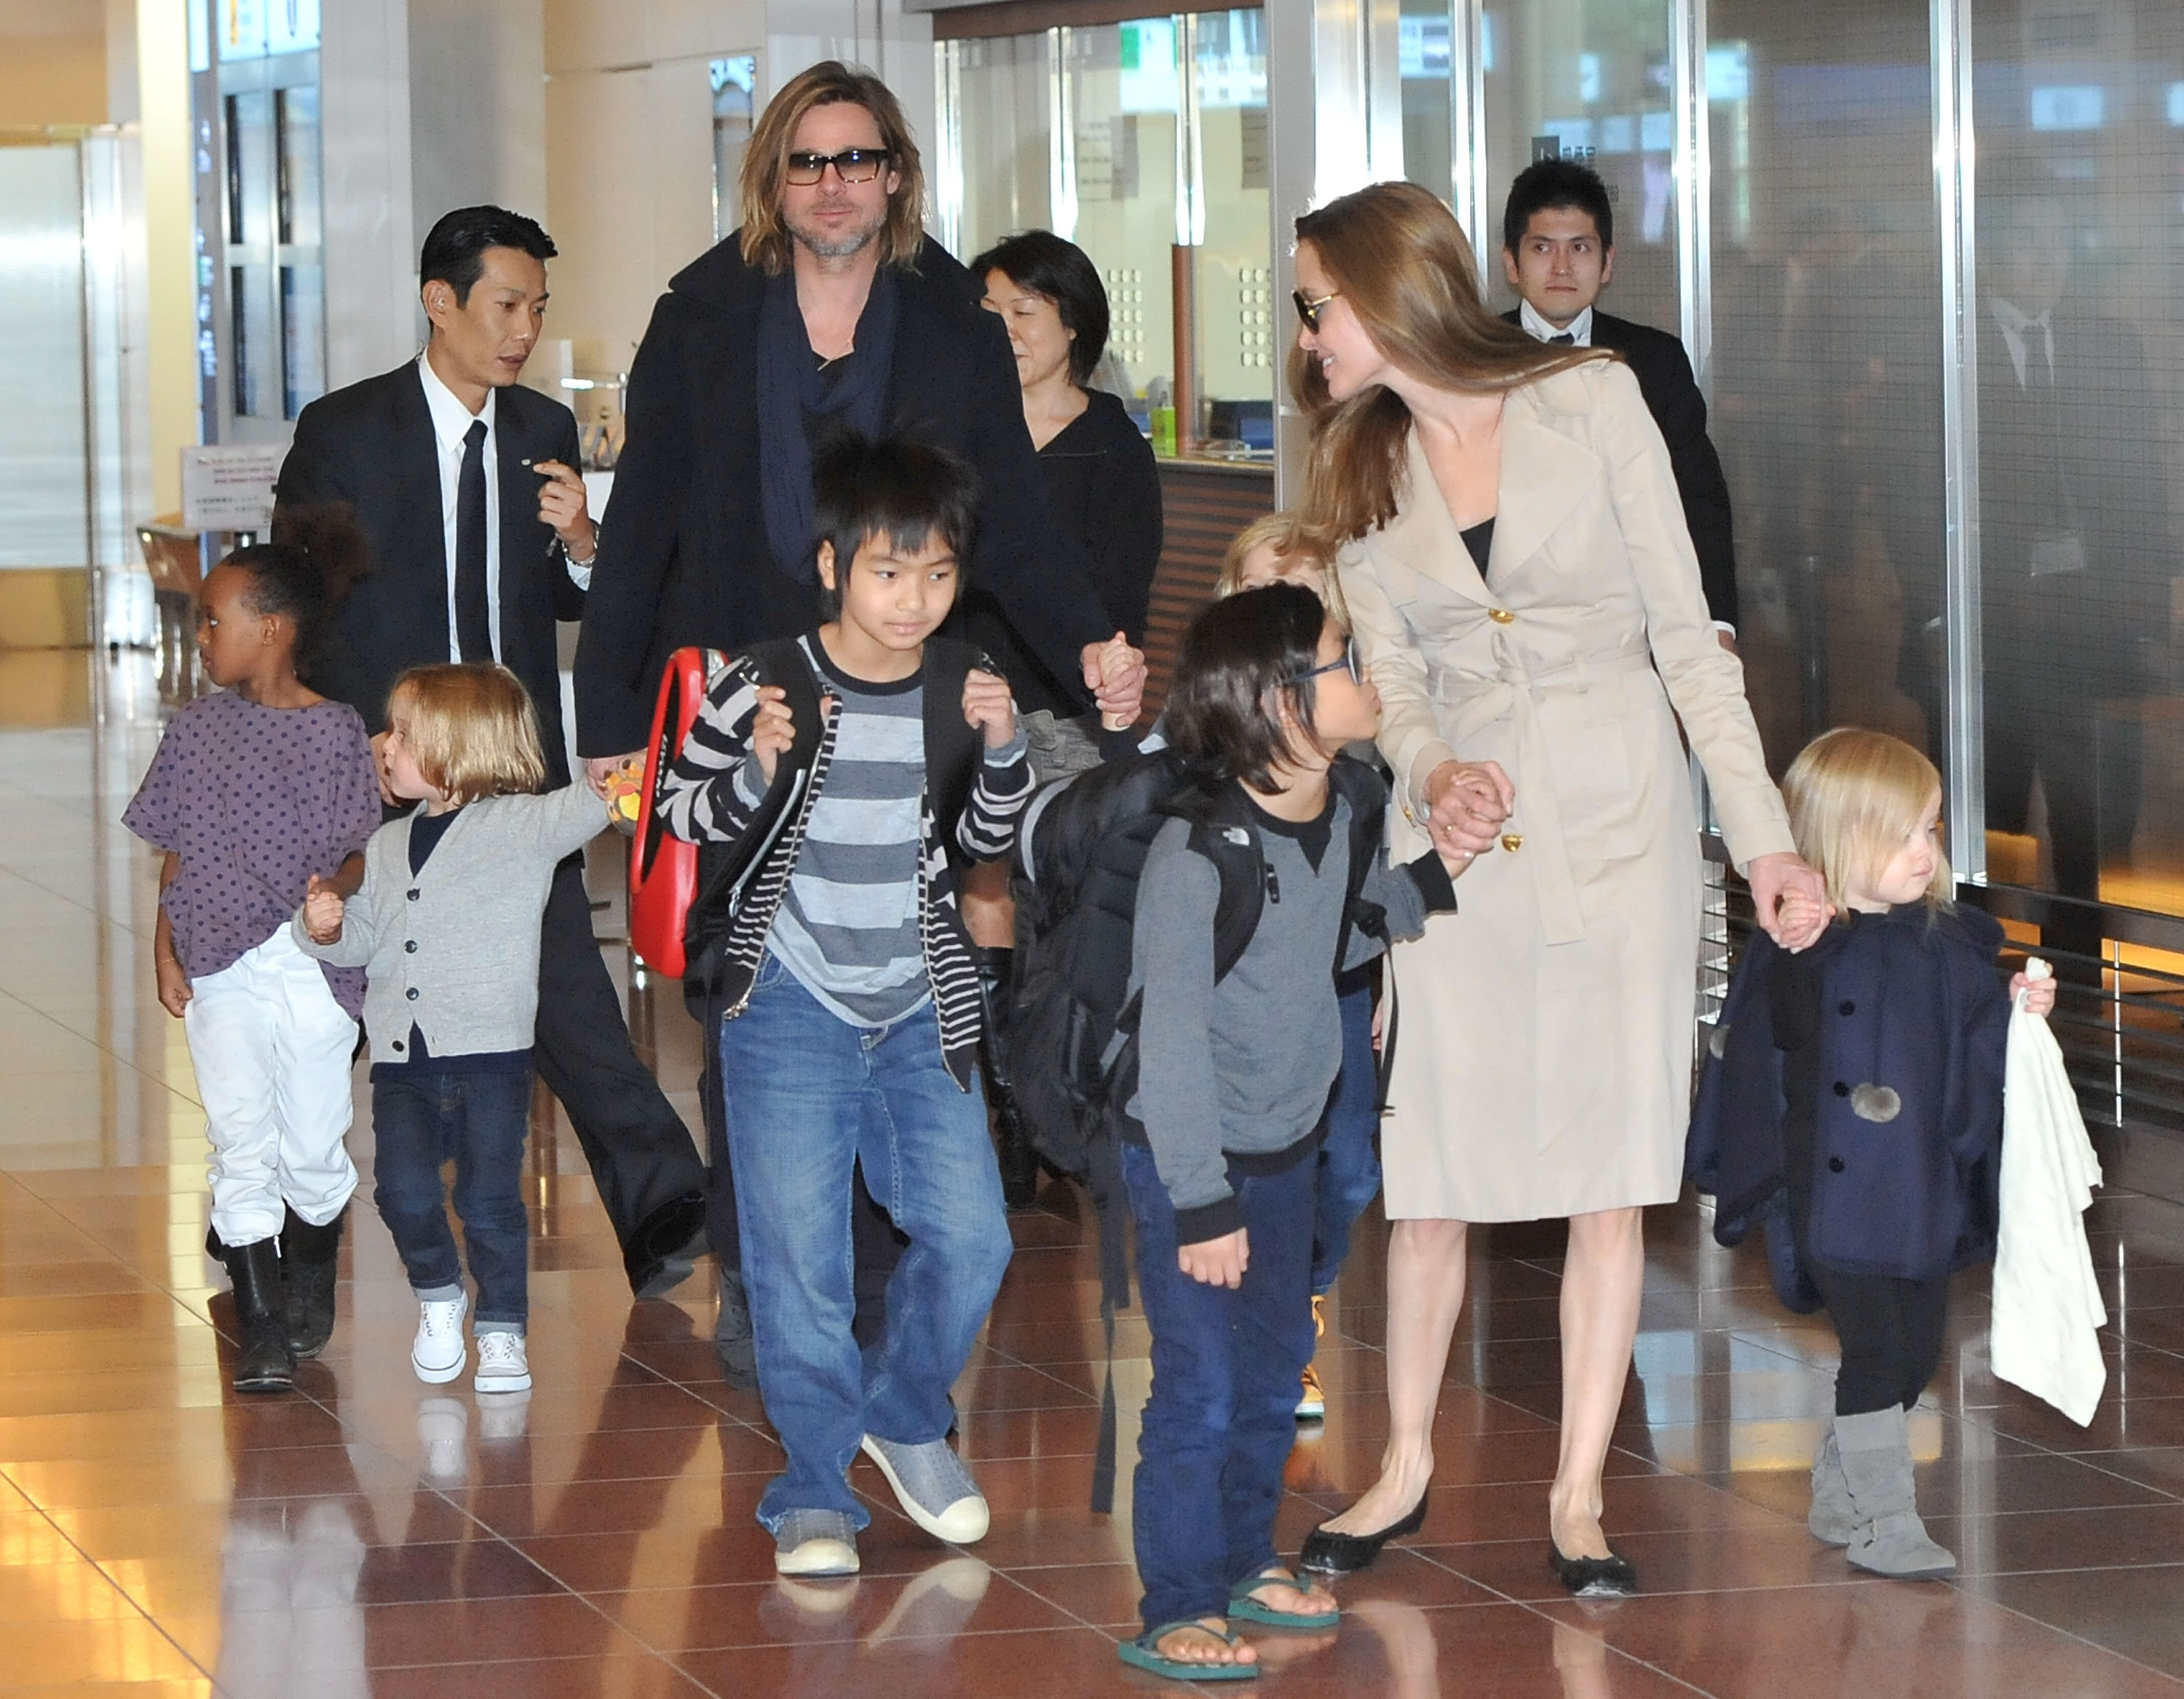 Brad Pitt and Angelina Jolie and their six children Maddox, Pax, Zahara, Shiloh, Knox, and Vivienne in Japan in 2011 | Source: Getty Images